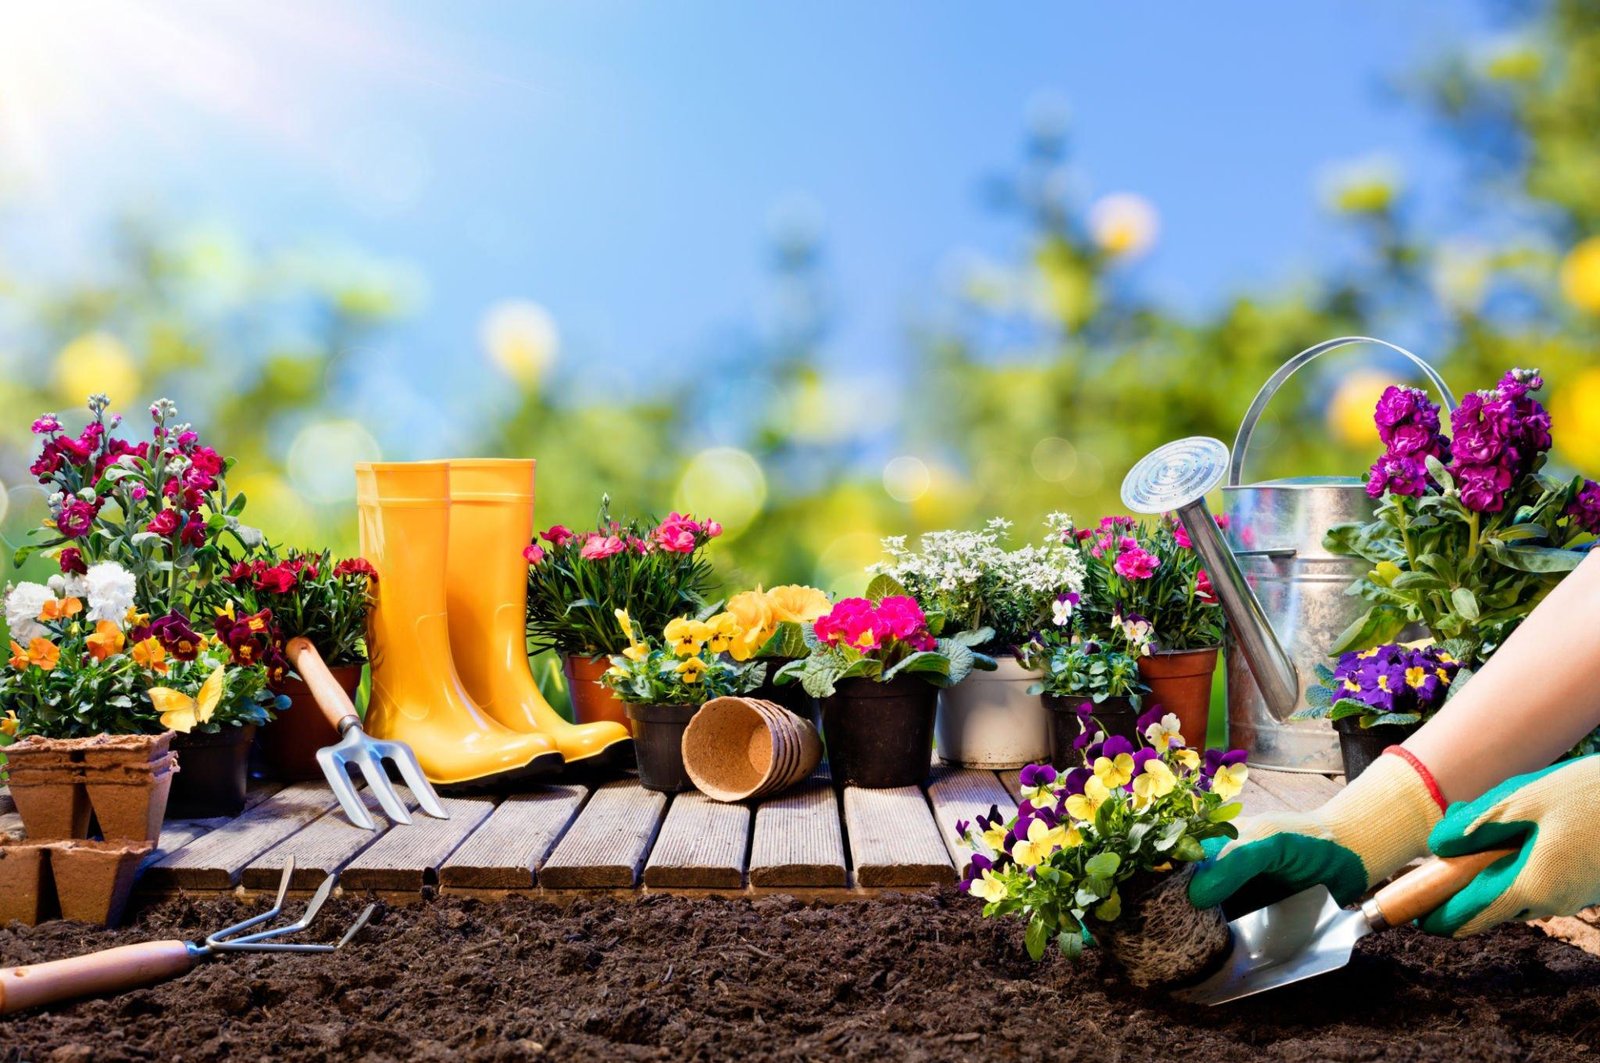 What are the health benefits of gardening?